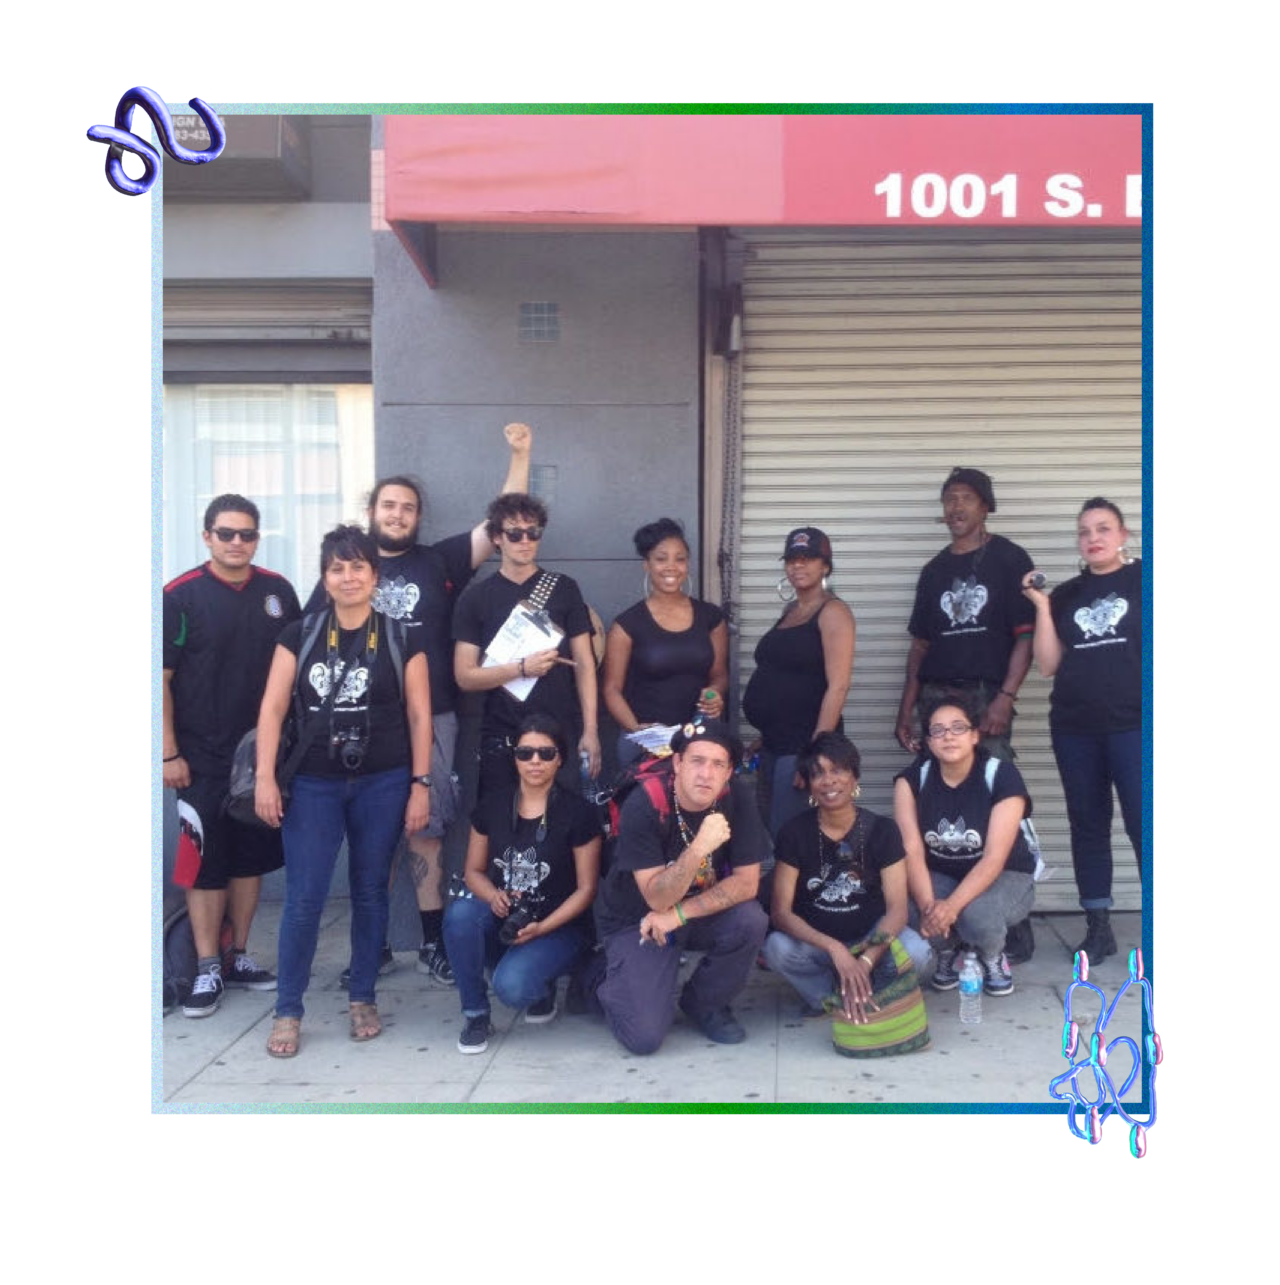 A predominantly BIPOC gathering of twelve adults smile as they stand and kneel on a sidewalk by a grey building in downtown Los Angeles. They are all dressed in black tops—many of which are a black t-shirt with a white screenprint of the Stop LAPD Spying Coalition logo—various dark-colored pants or shorts, and comfortable shoes. Four people are kneeling or squatting in the front row and eight people are standing in the back row. Some are wearing sunglasses, a hat, a backpack, or carrying a dSLR camera.